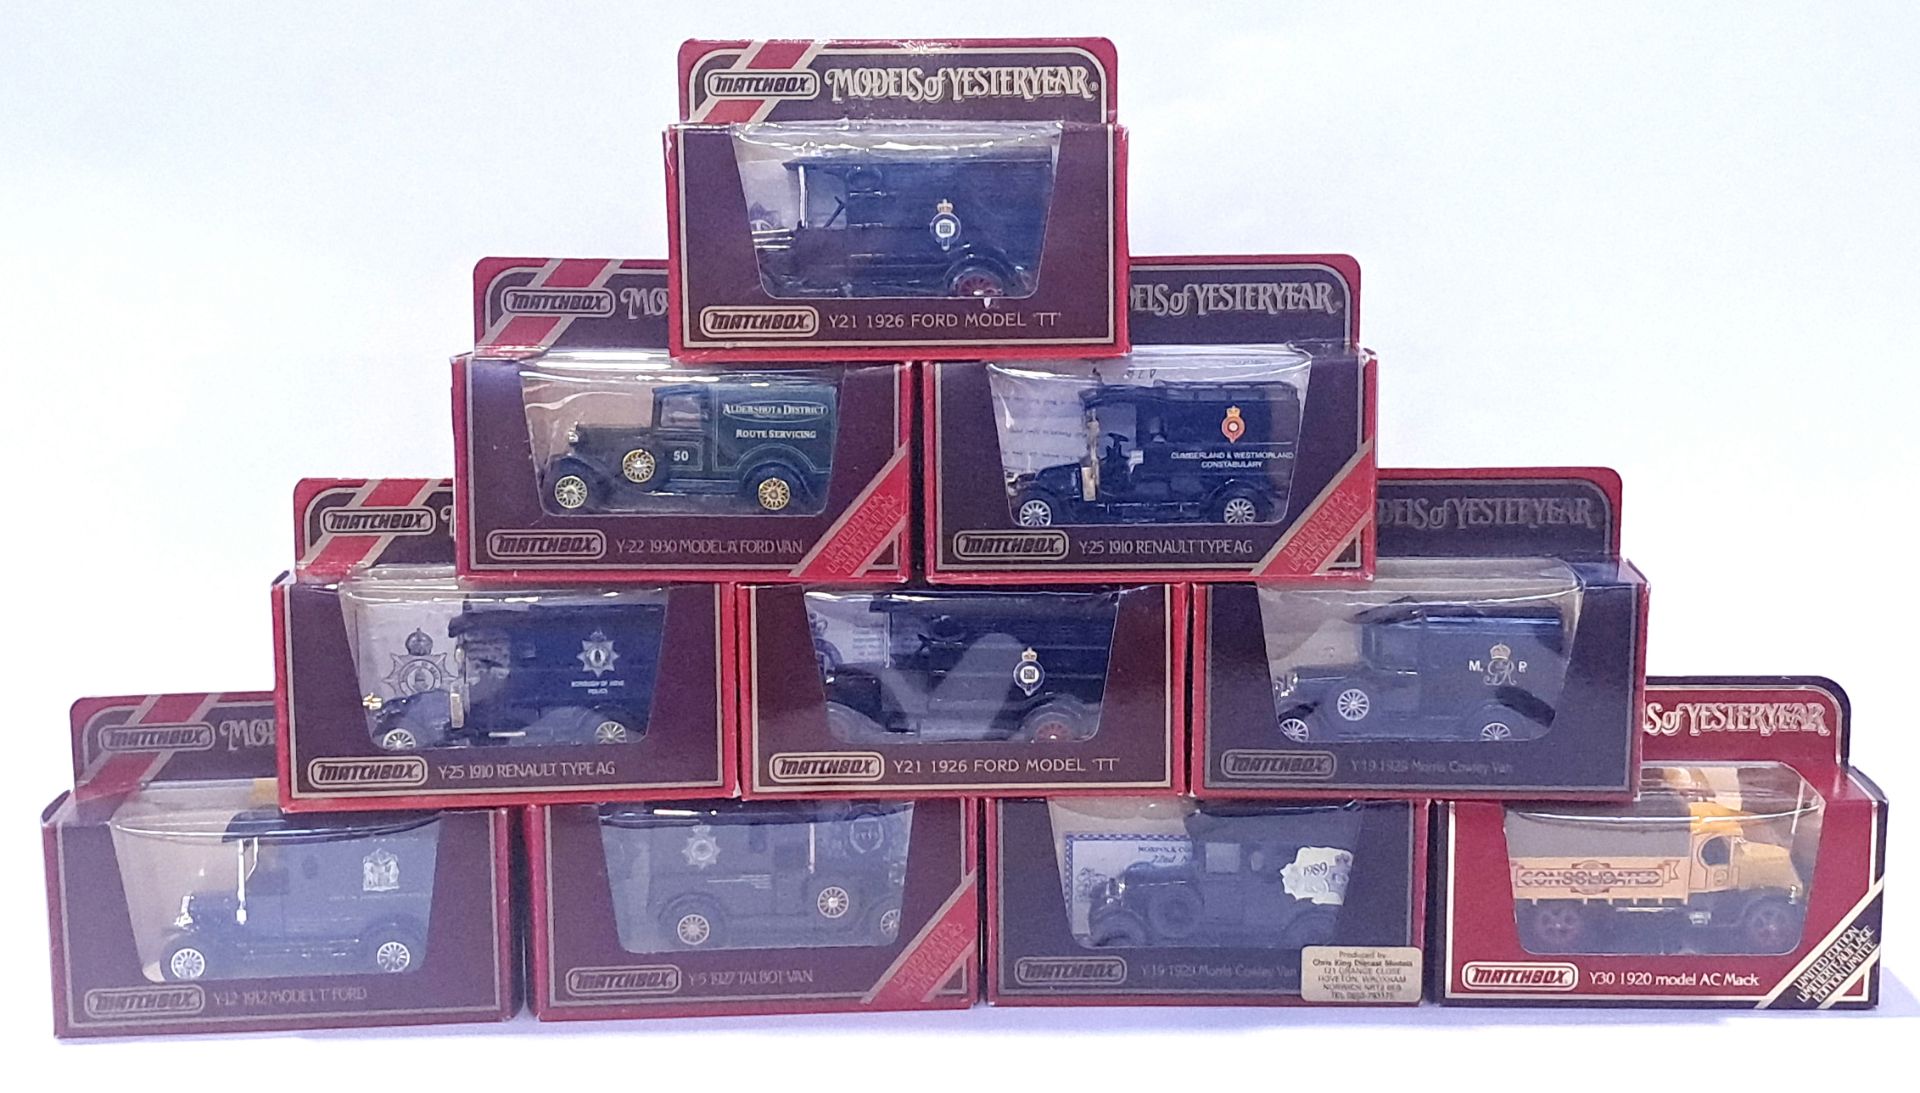 Matchbox Models of Yesteryear Promotional Models, a boxed group of Castlehouse Models and similar...